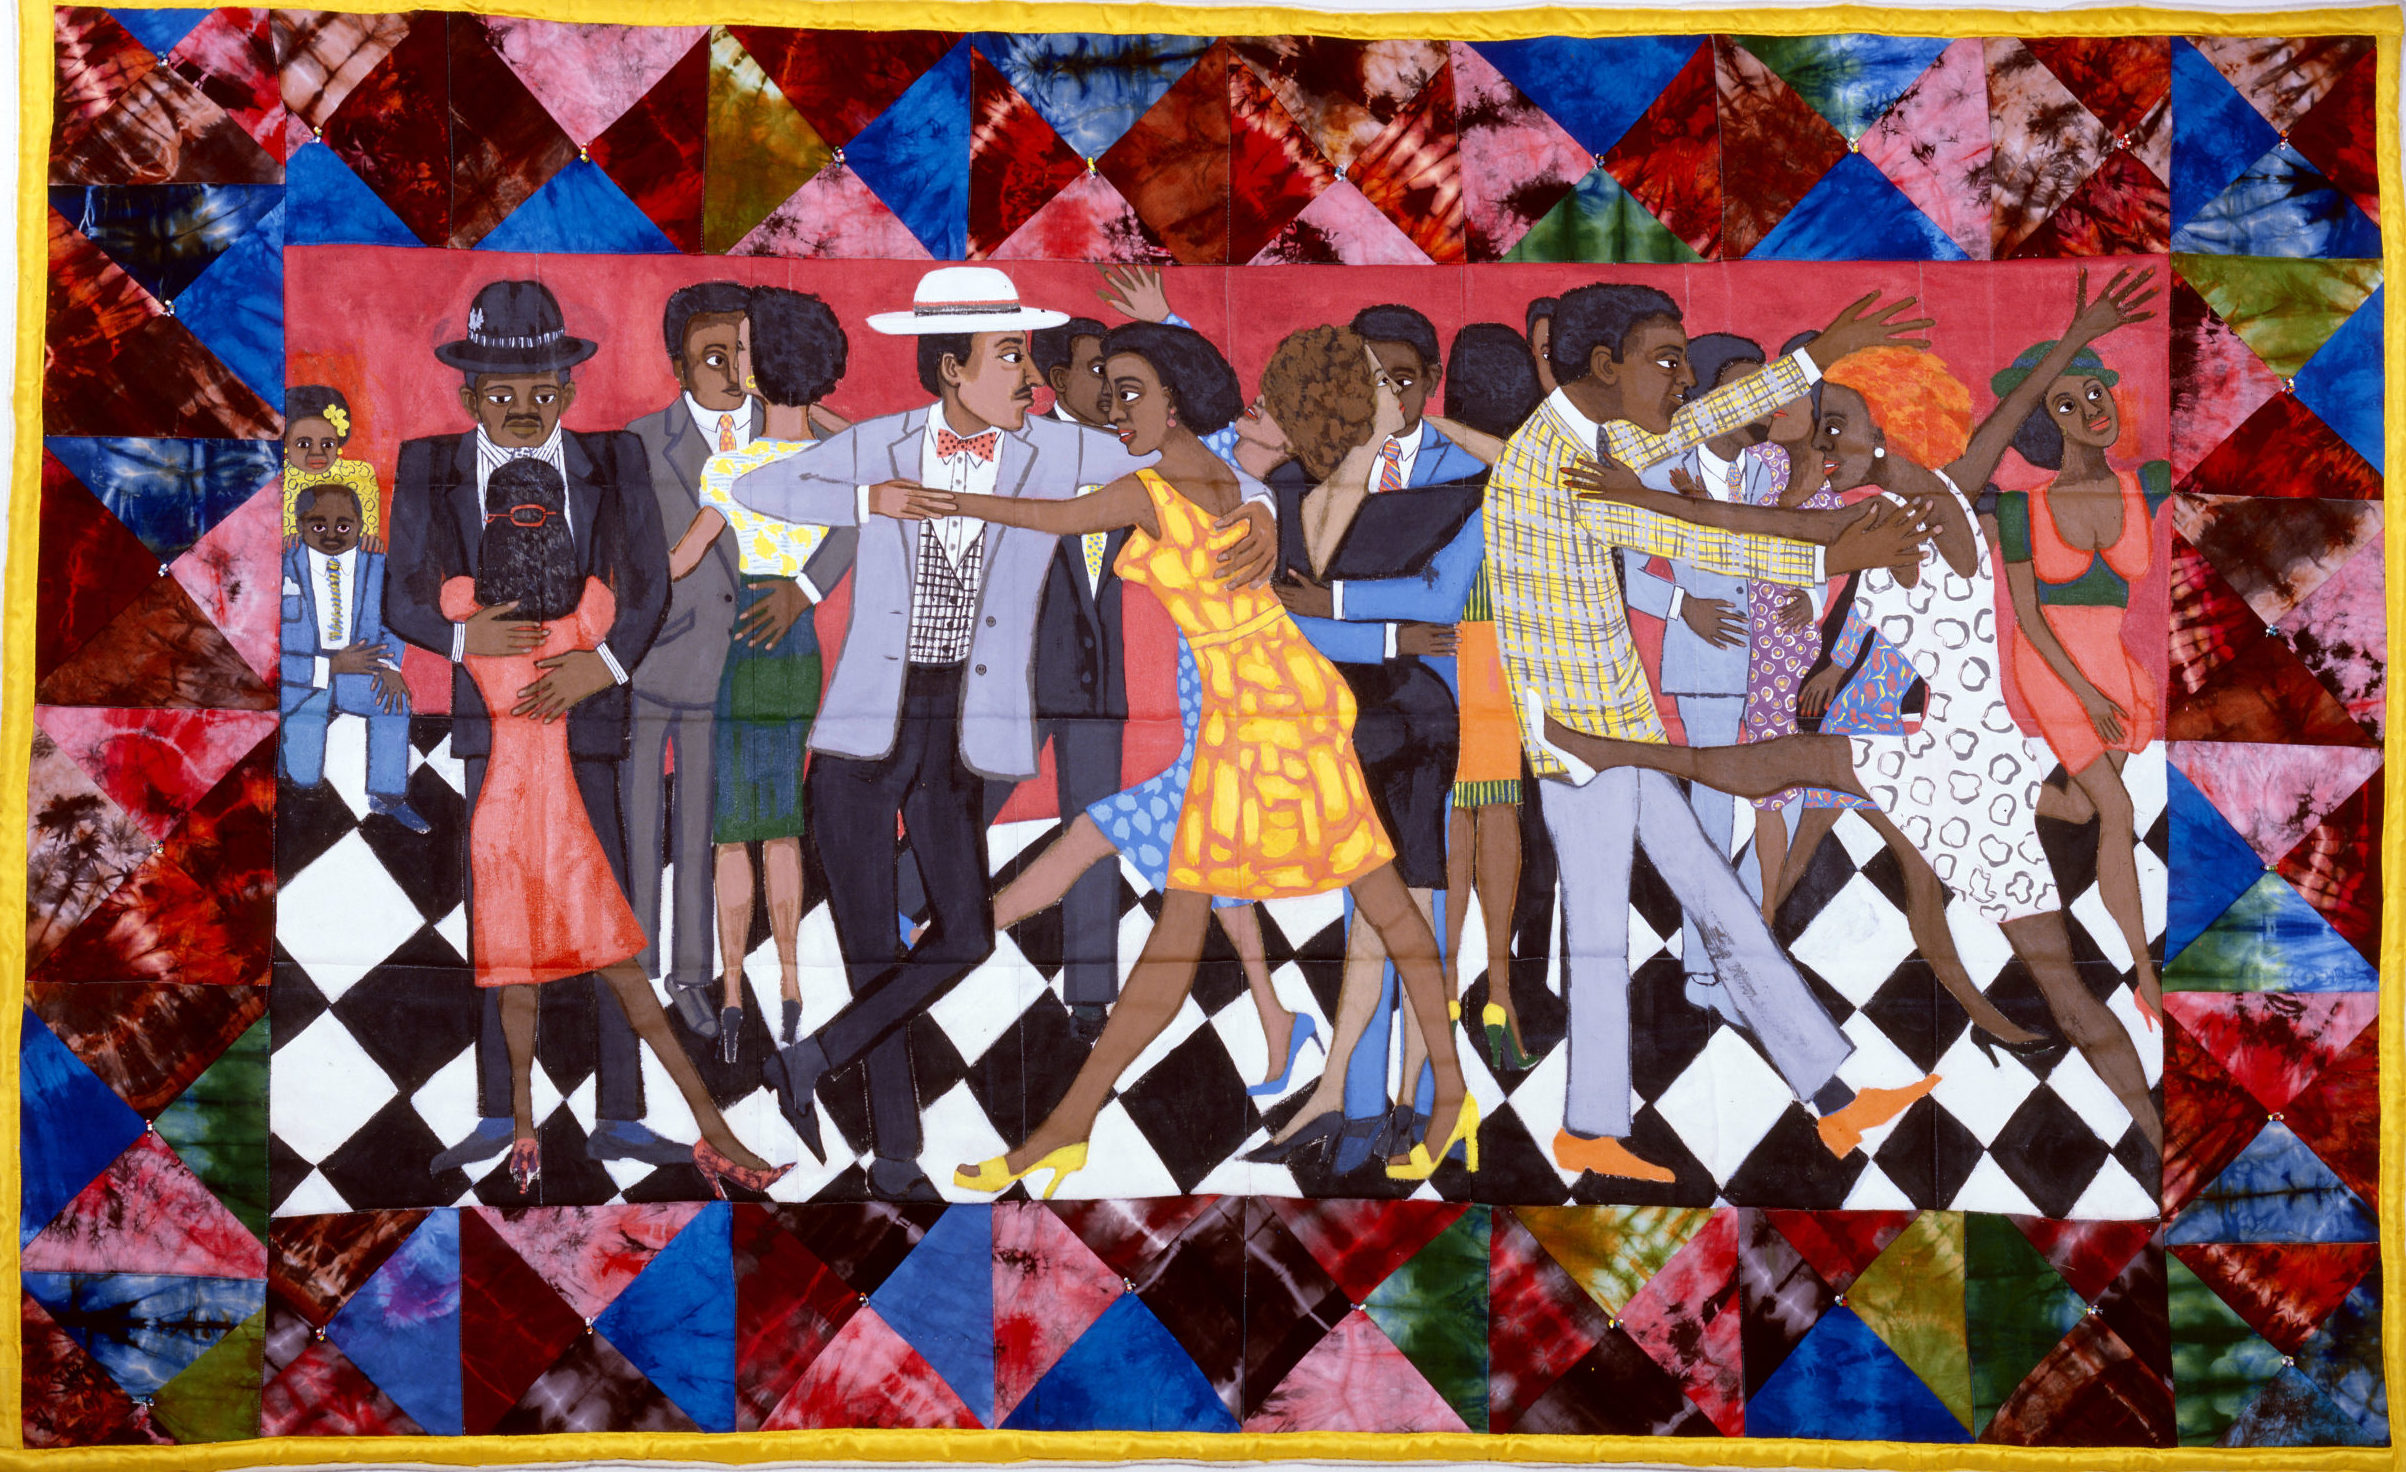 Groovin' High (alt Stompin at the Savoy), Ringgold, Faith, 1986, Spelman College Museum of Fine Art